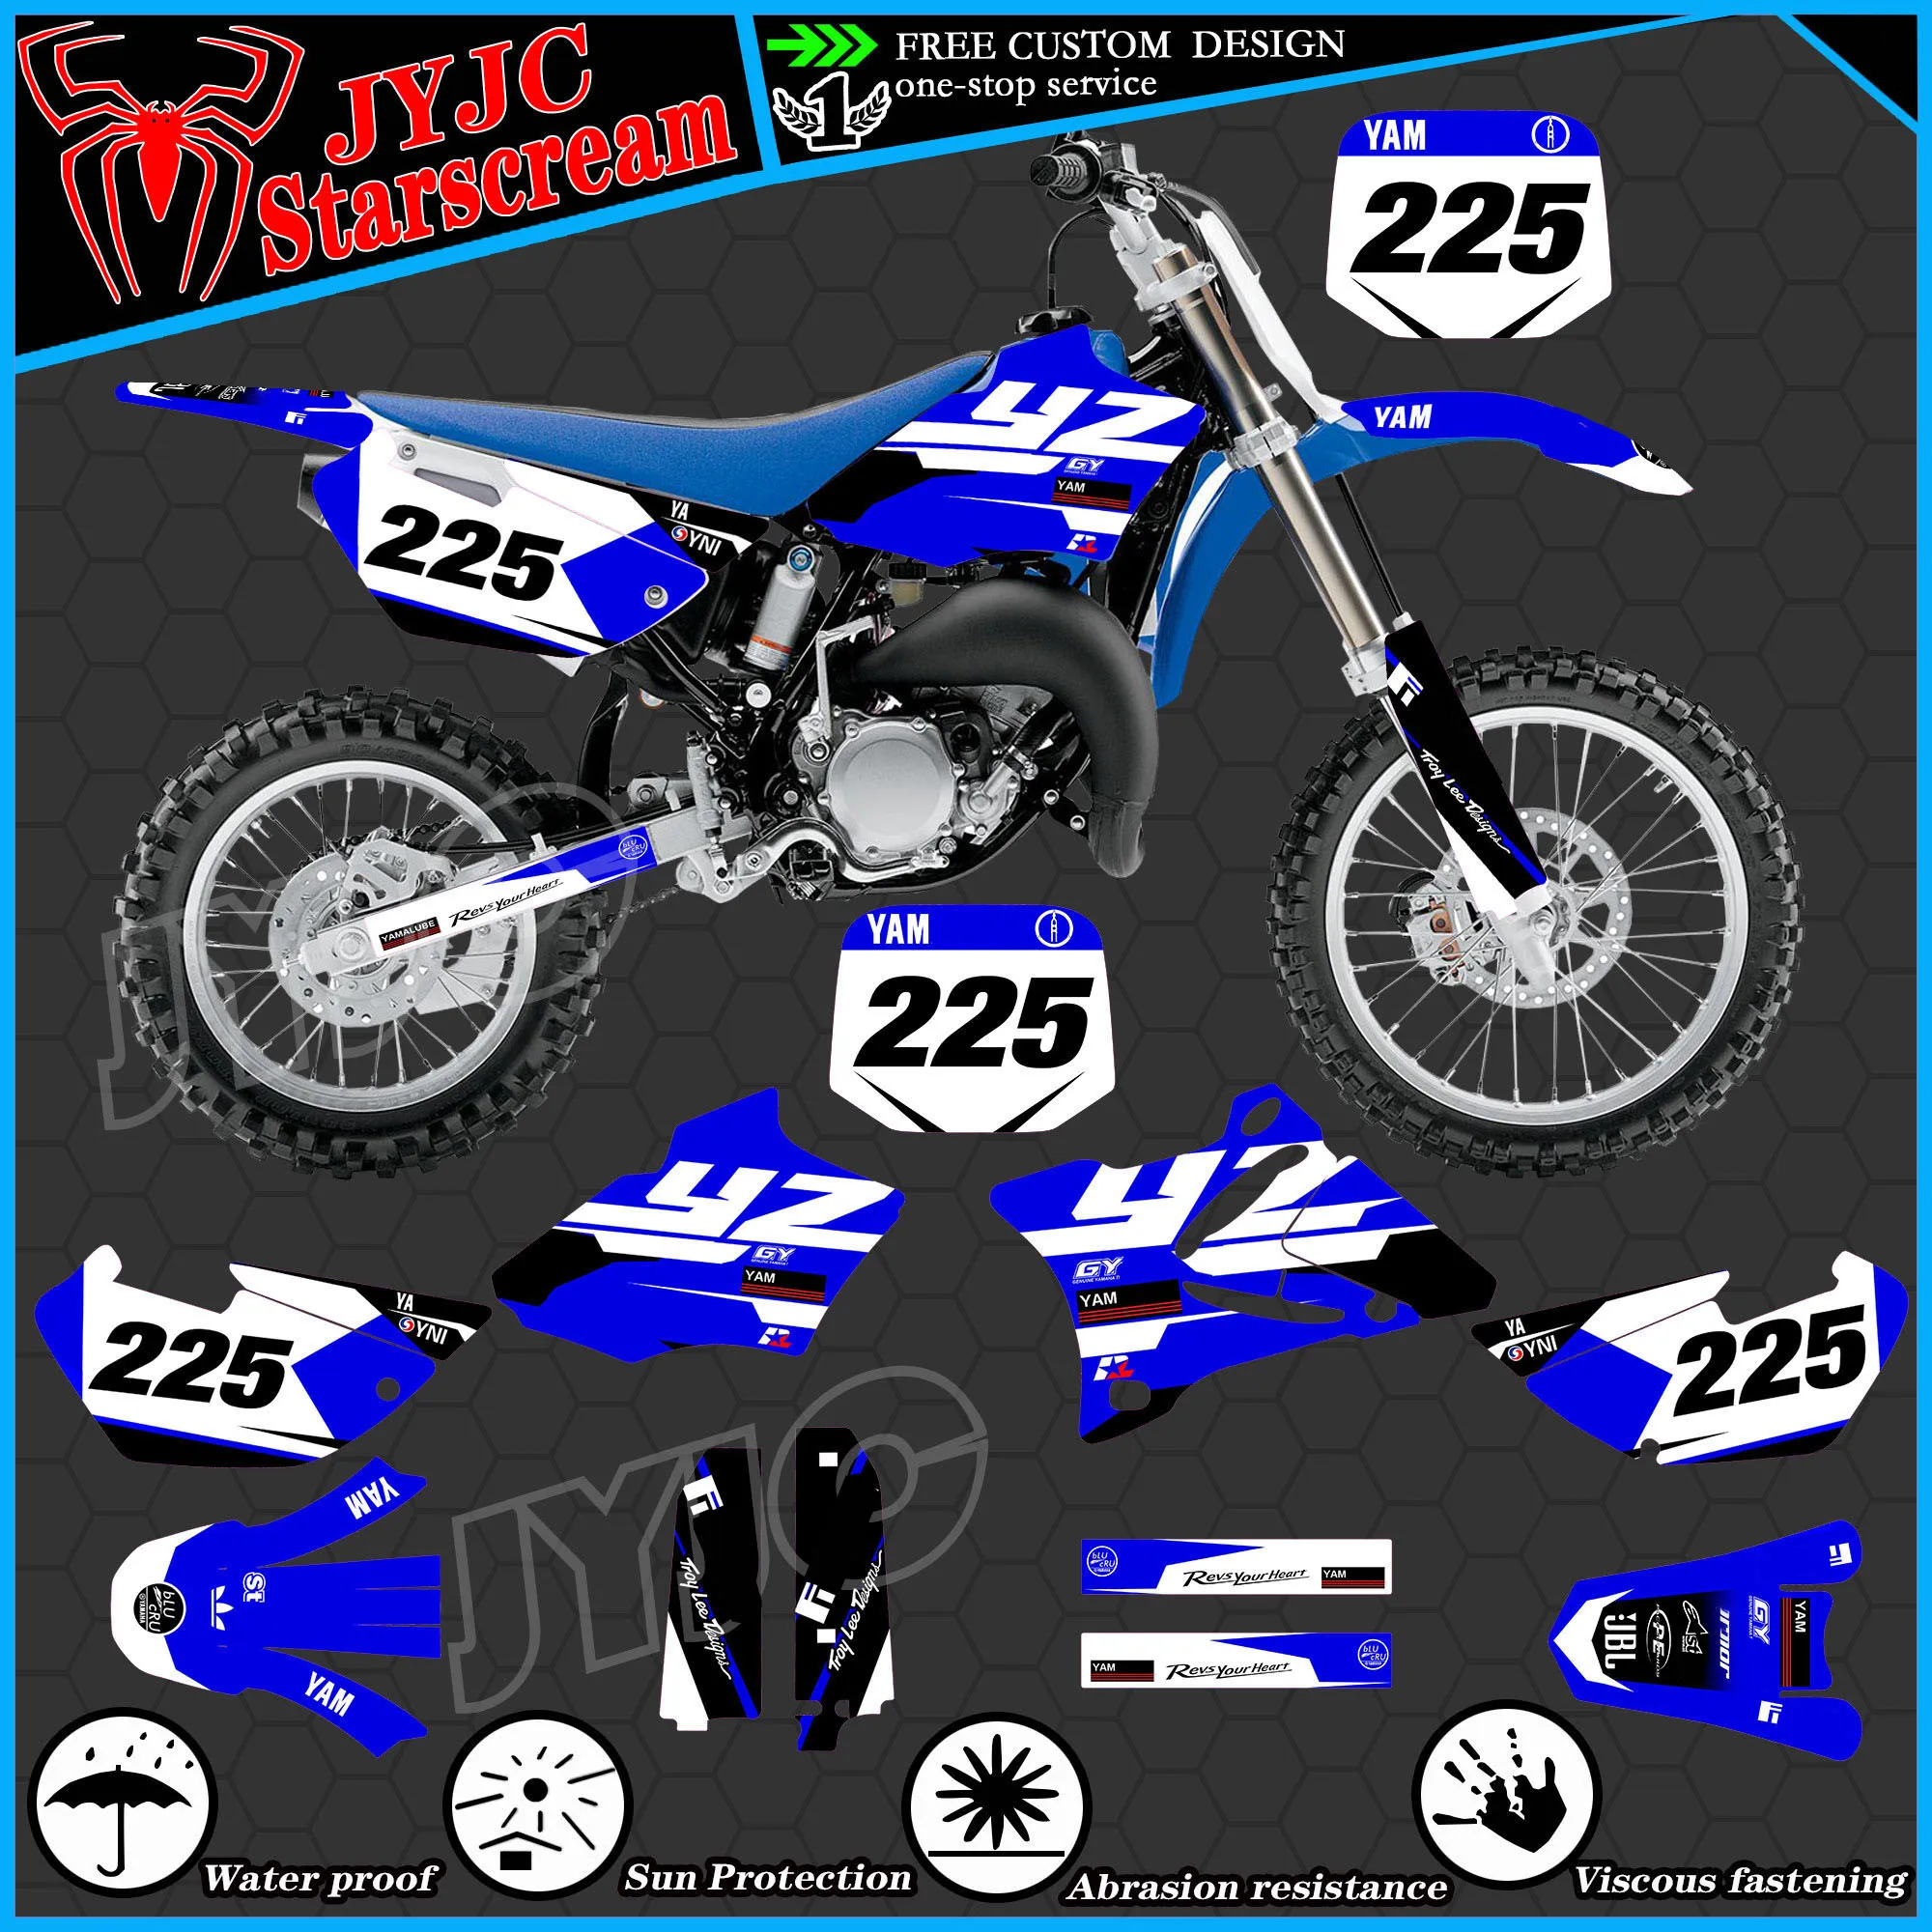 Graphic Kit for YAMAHA 2002 2003 2004 2005 2006 2007 2008 2009 2010 2011 2012 2013 2014 YZ85 Motorcycle Decal Stickers graphic kit for yamaha 2002 2003 2004 2005 2006 2007 2008 2009 2010 2011 2013 2014 yz125 250 motorcycle decal stickers